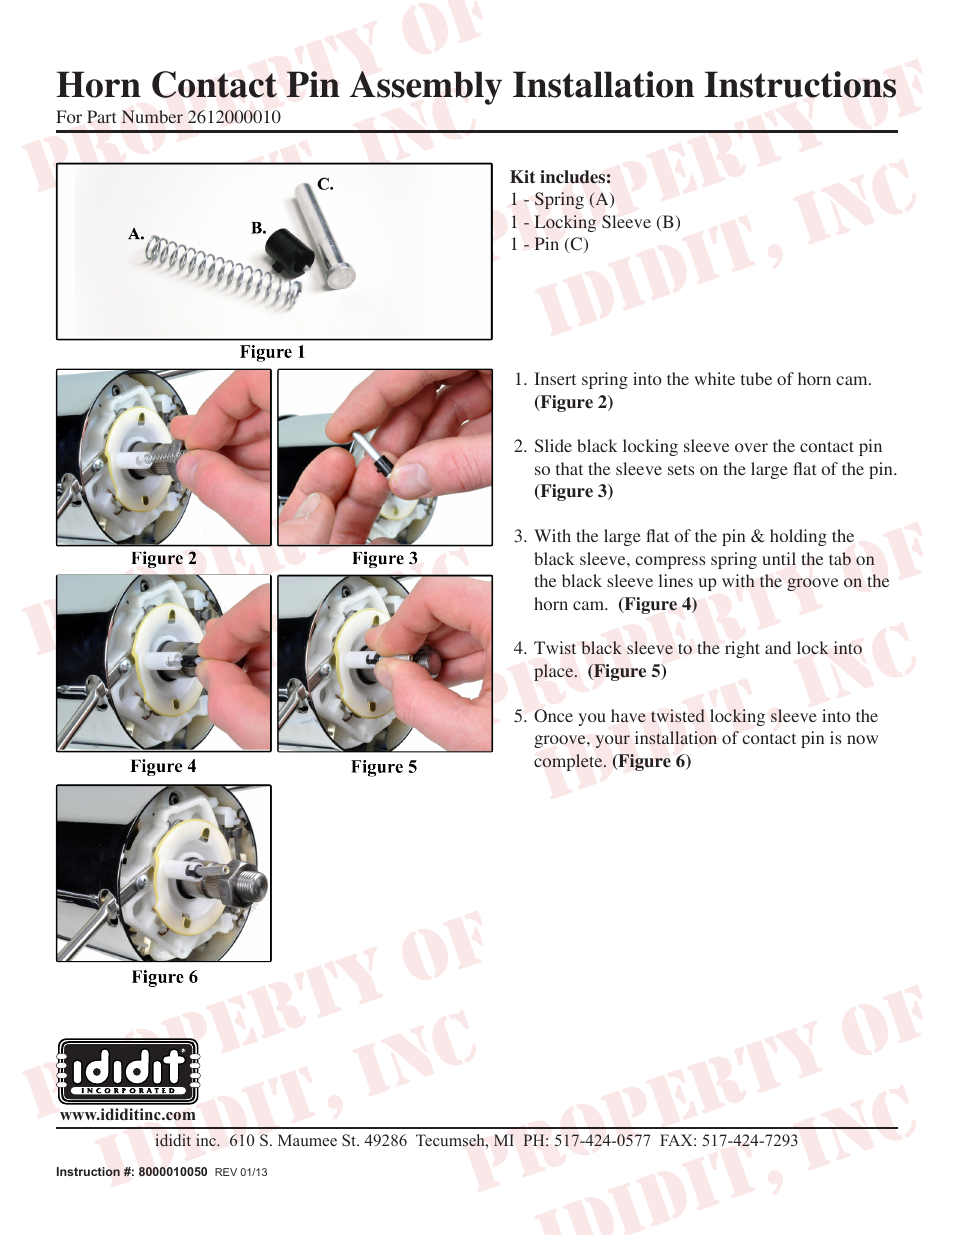 Horn Contact Pin Assembly